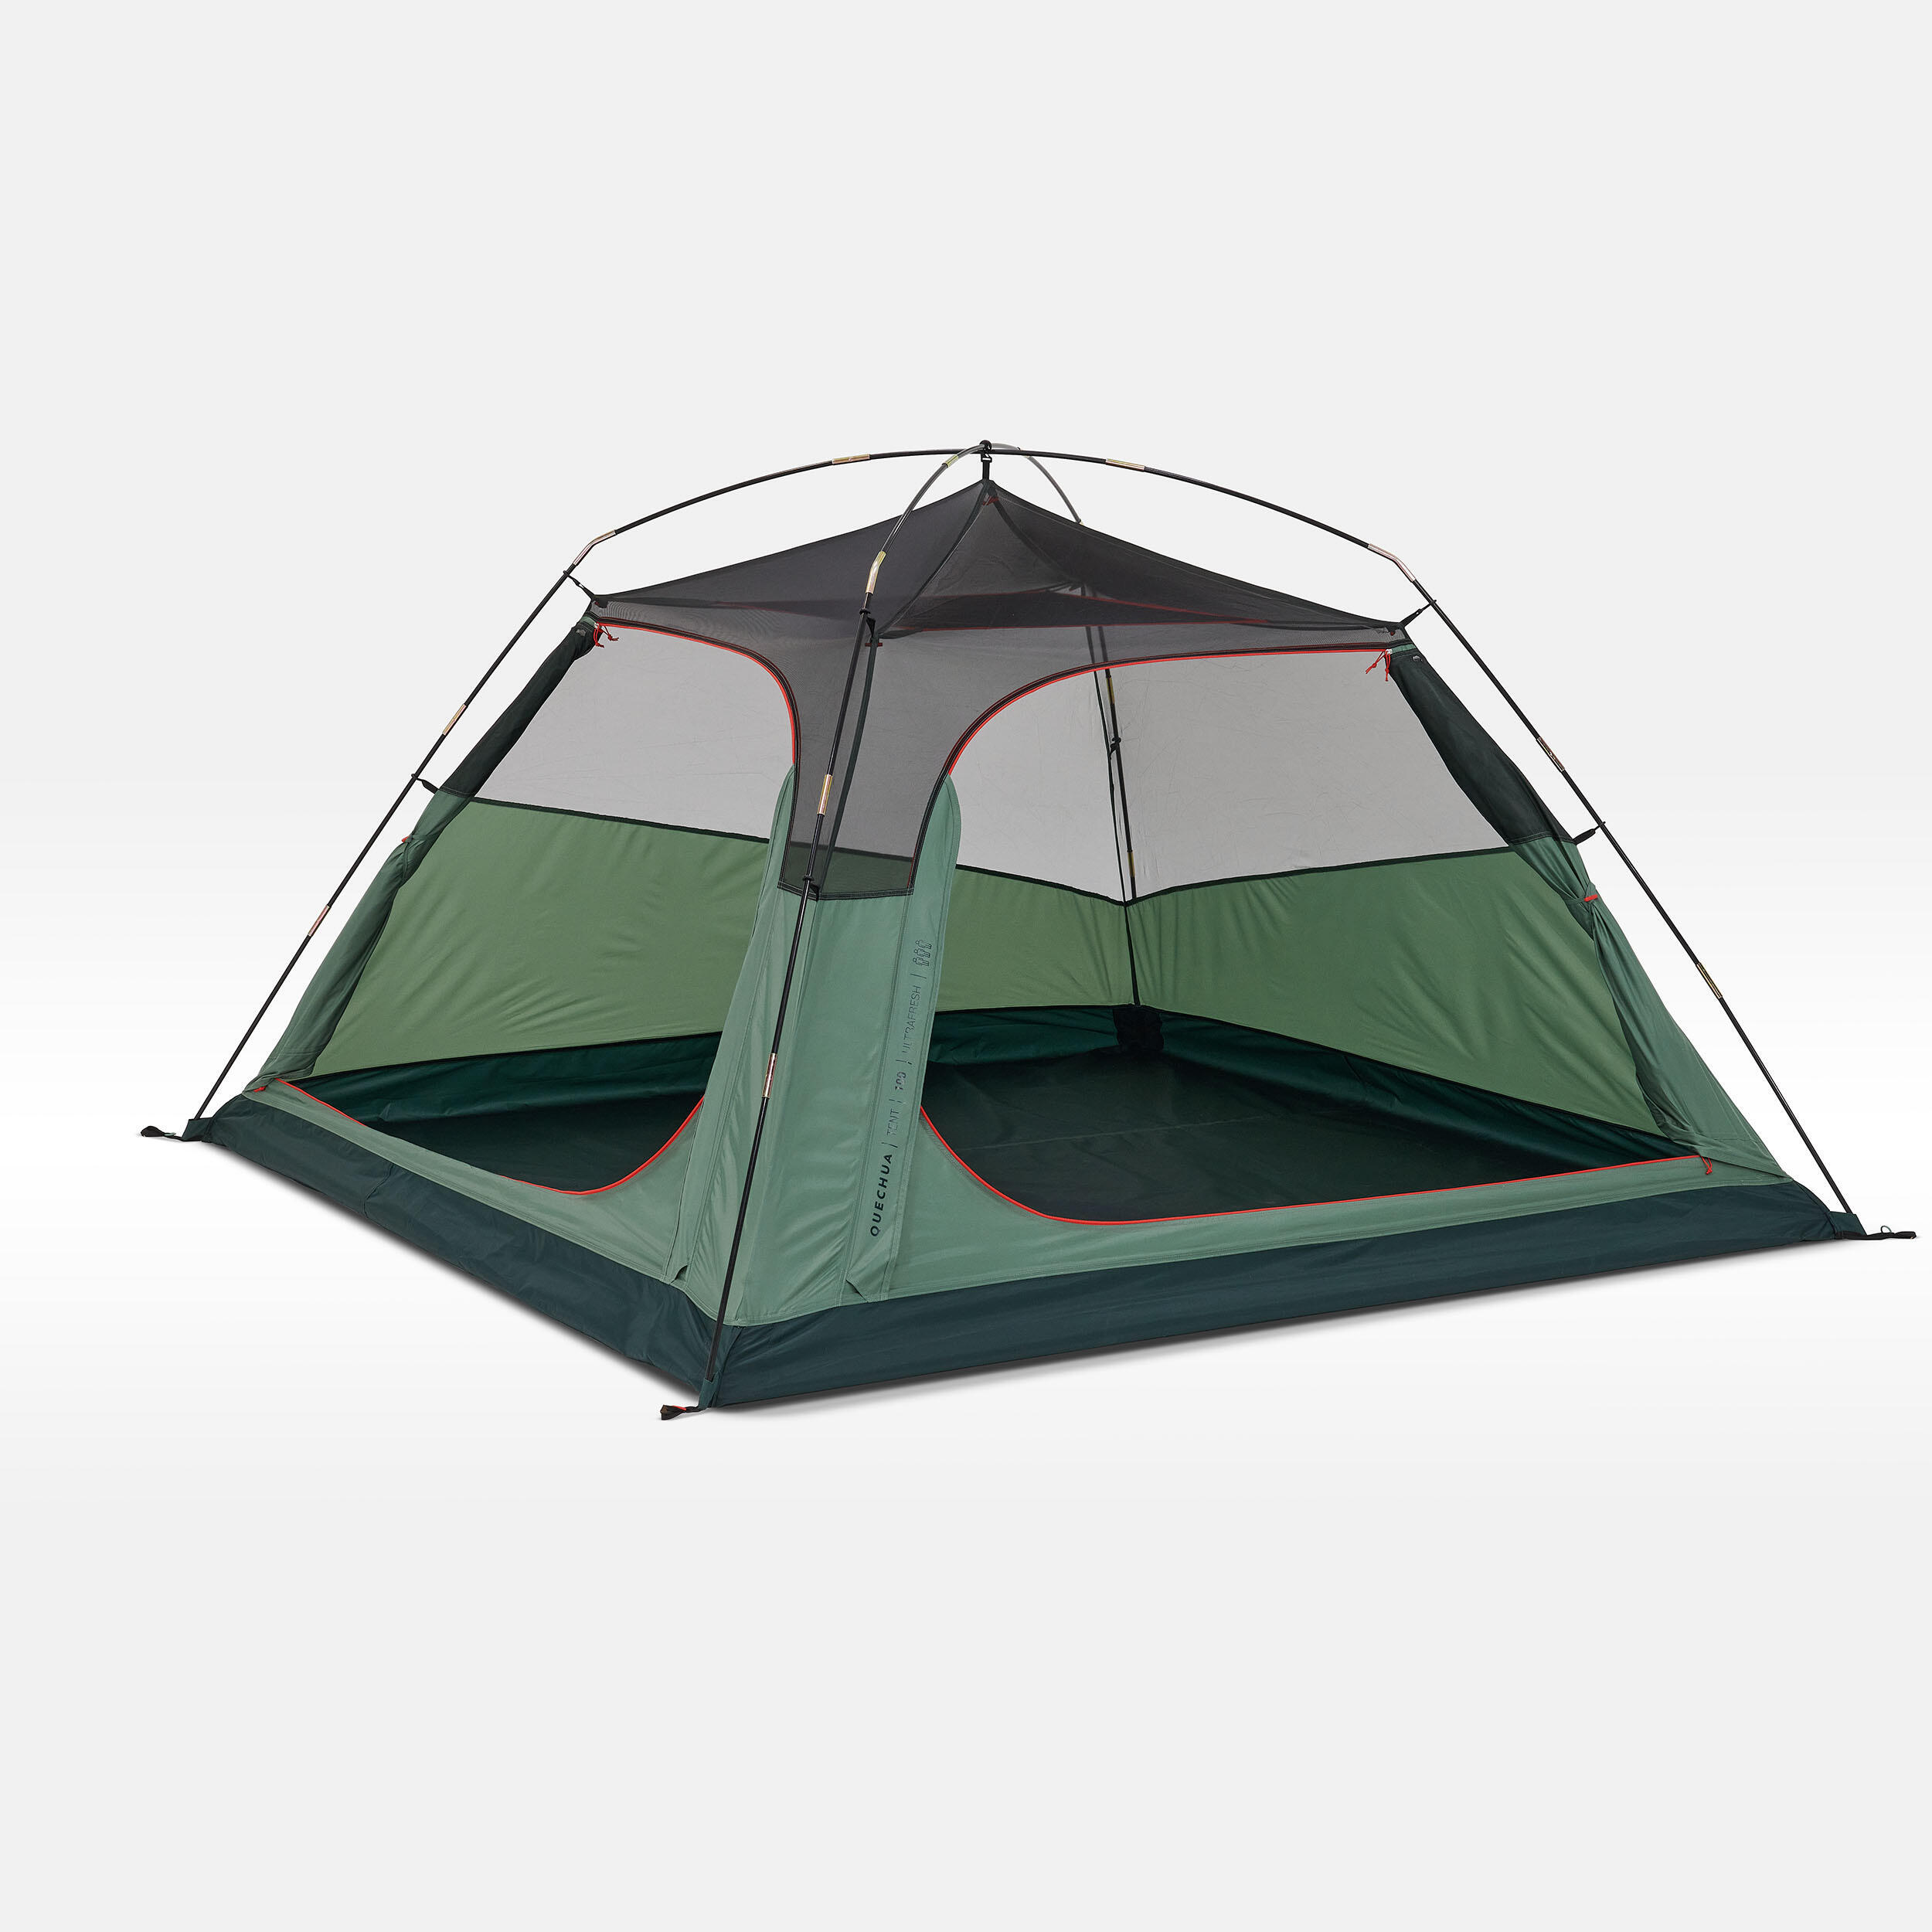 Camping tent - MH100  - 3-person - Fresh 20/24